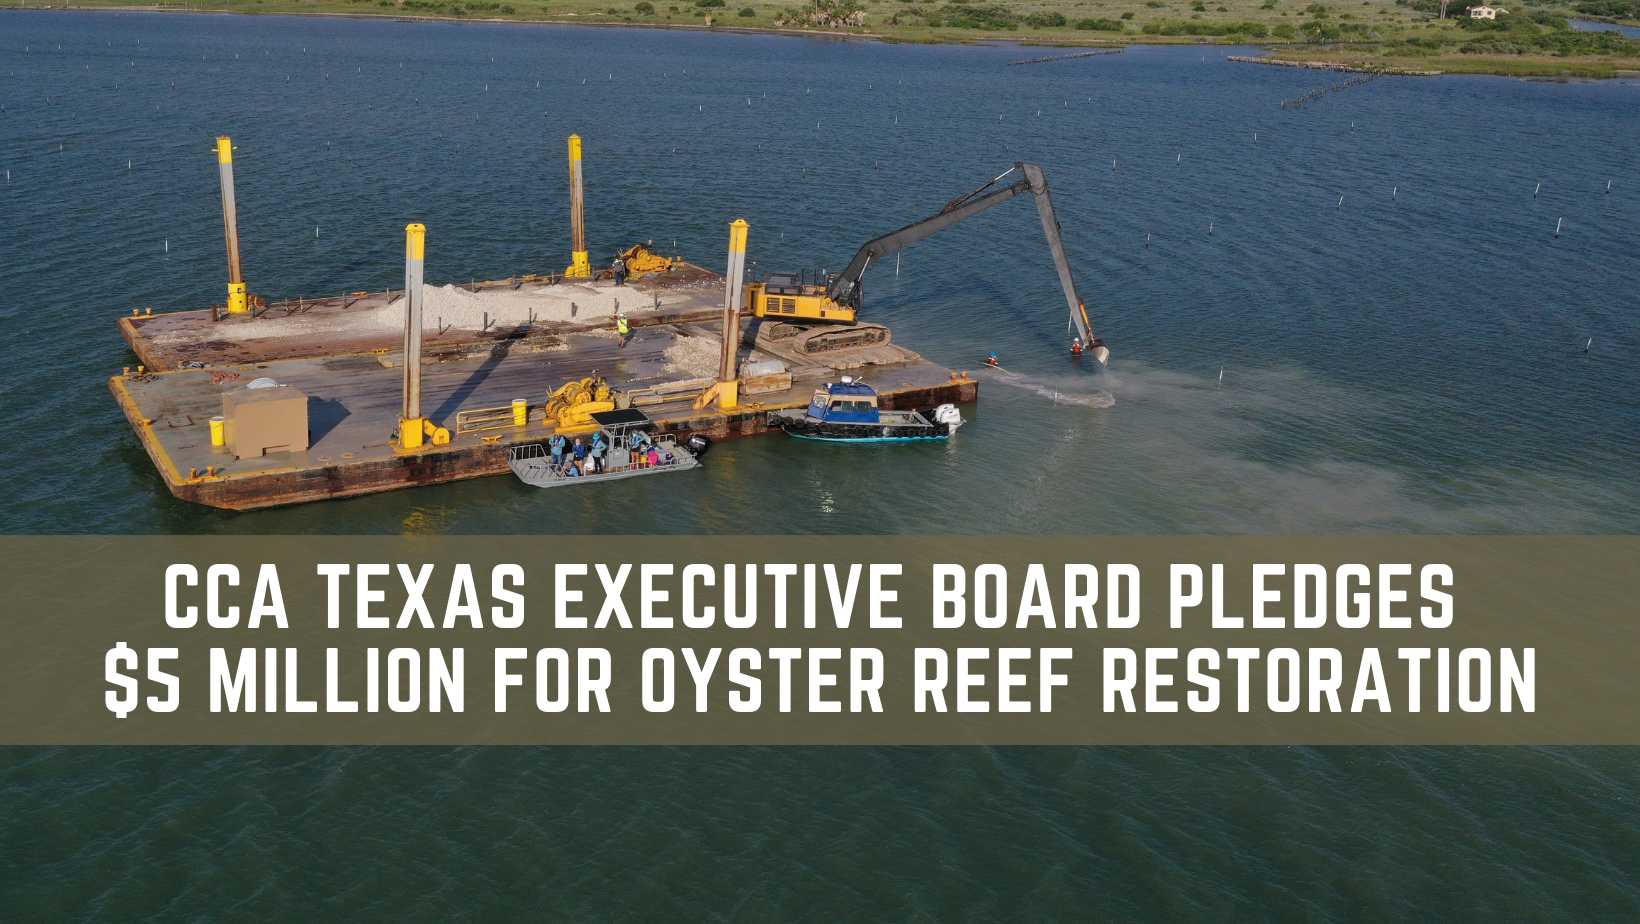 CCA Texas Executive Board Pledges $5 Million for Oyster Reef Restoration